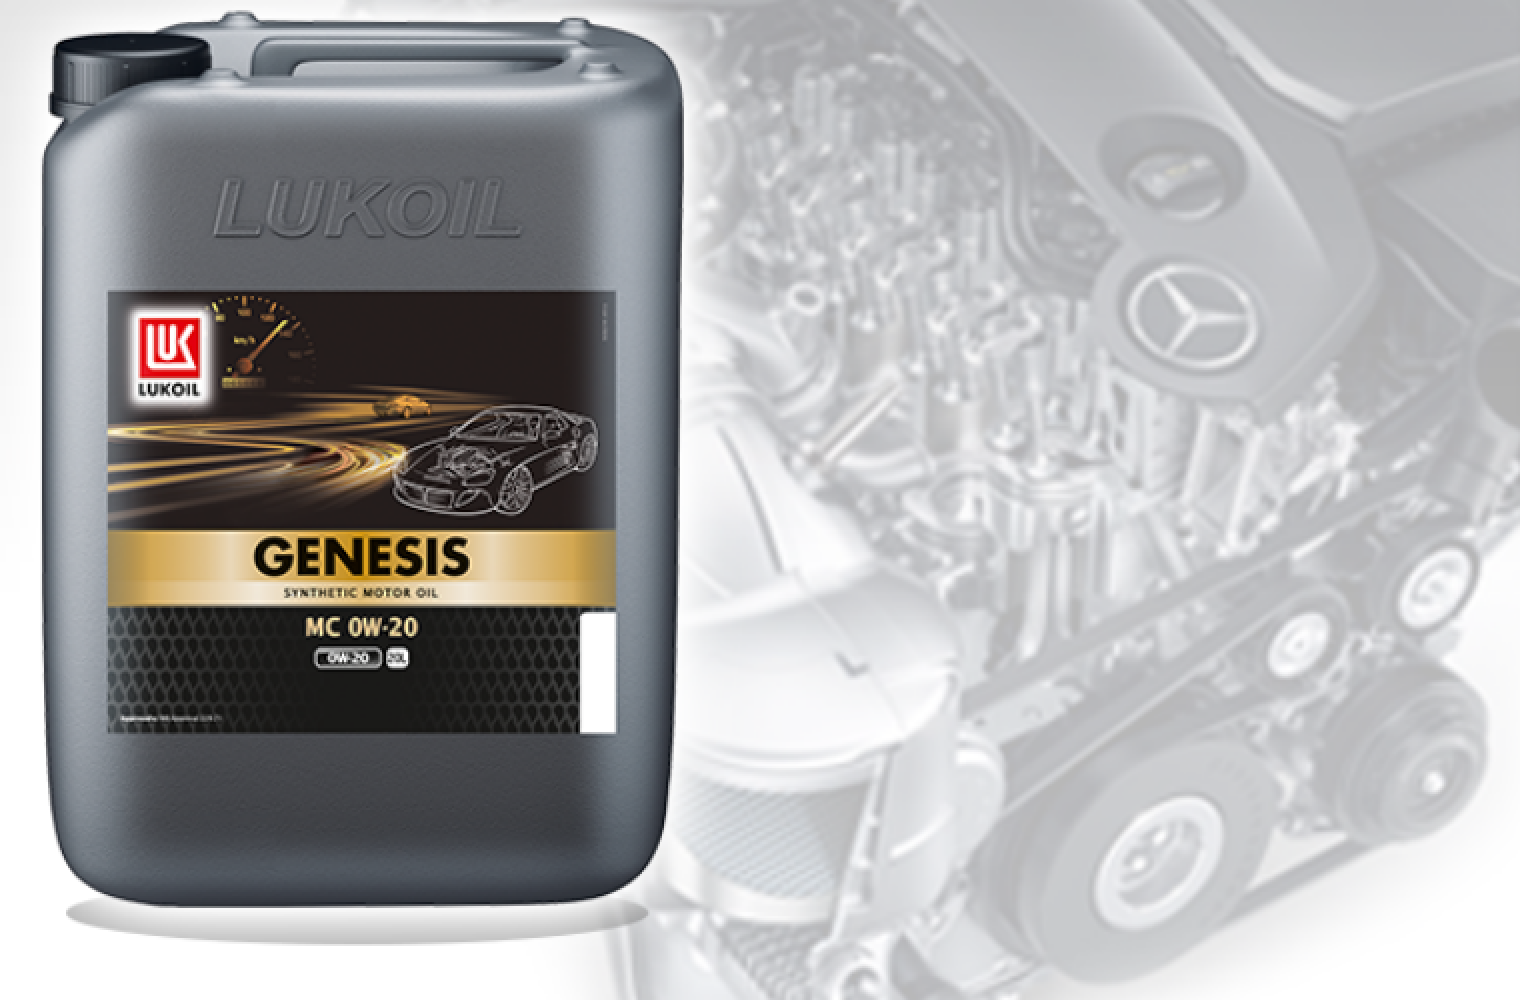 Lukoil Genesis 0w20. Генезис Лукойл 0-w20 Special. Моторное масло Лукойл 0w20. Genesis Special dx1 0w-20. Масло лукойл 0w 20